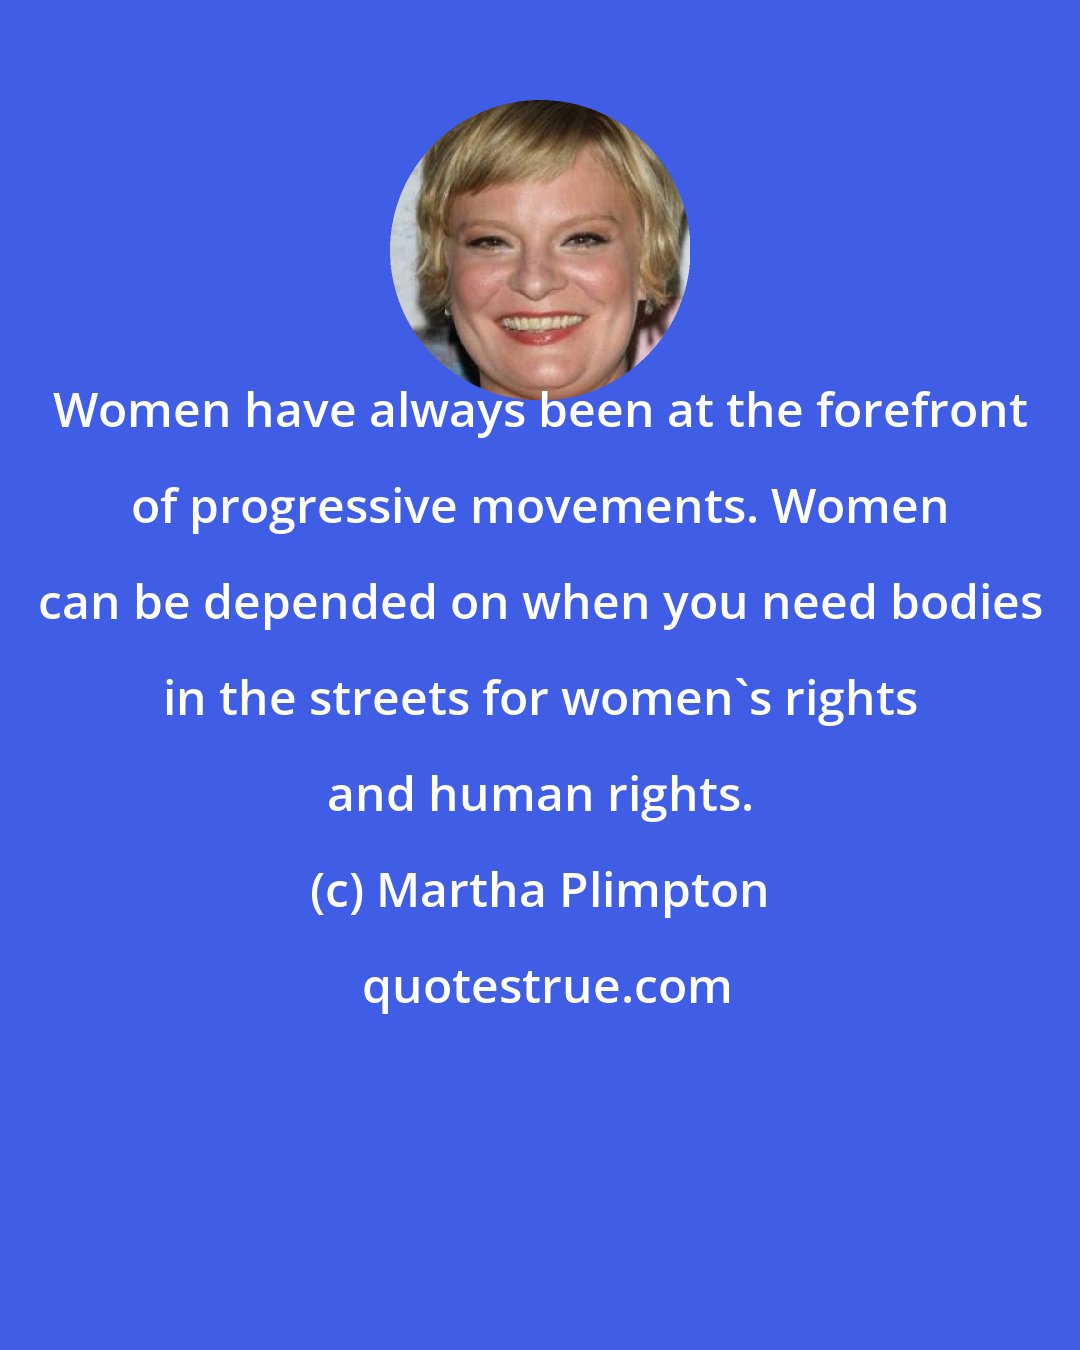 Martha Plimpton: Women have always been at the forefront of progressive movements. Women can be depended on when you need bodies in the streets for women's rights and human rights.